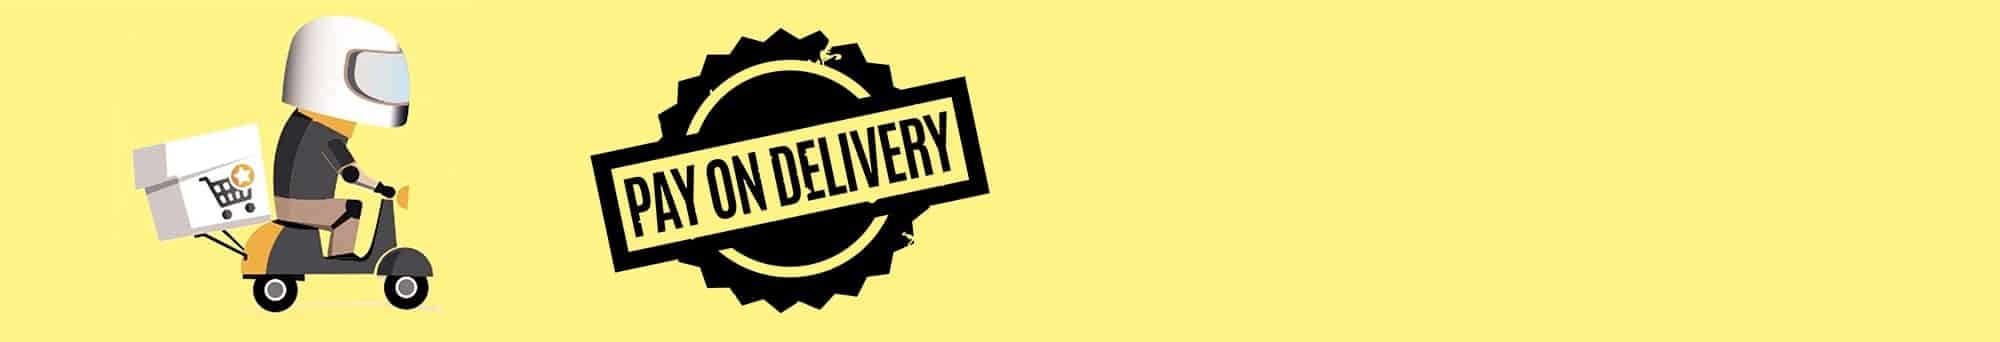 How to Order on Jumia and Pay on Delivery